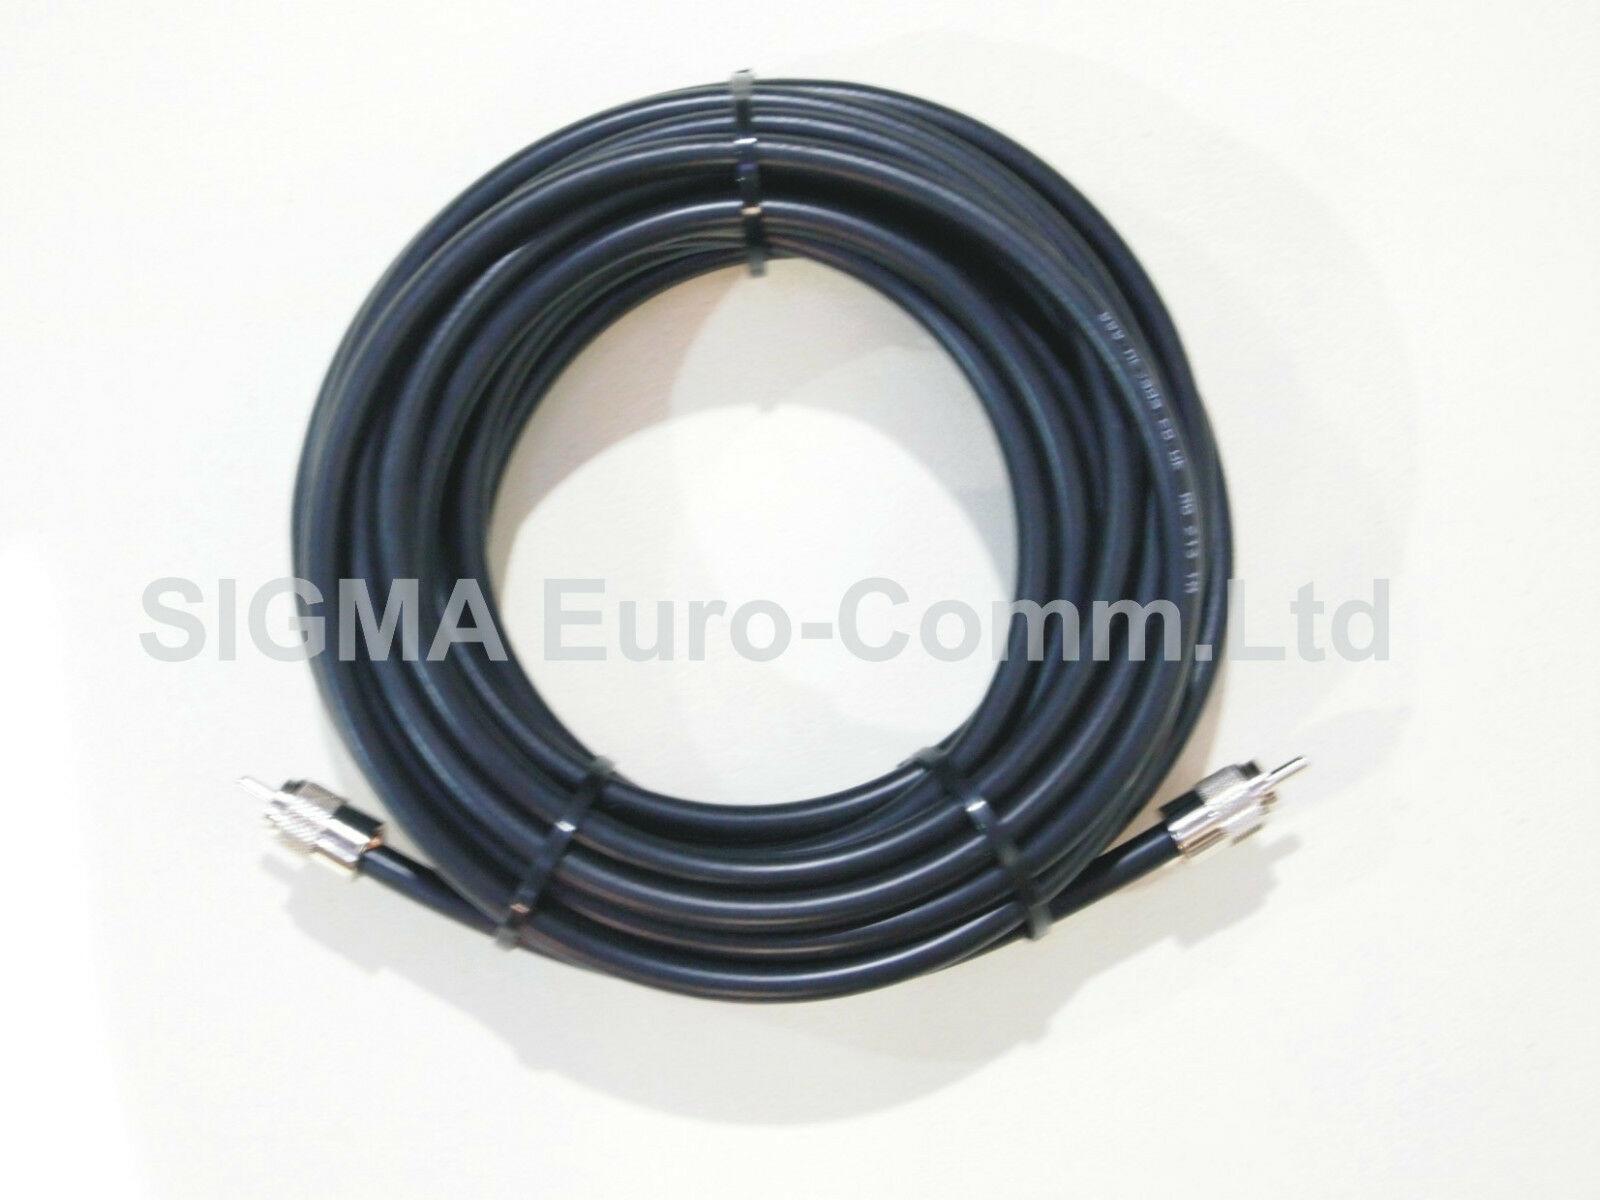 Sigma RG213 Low Loss 50 Ohm Coaxial Cable 3m Fitted With 2 x PL259 Male Connectors